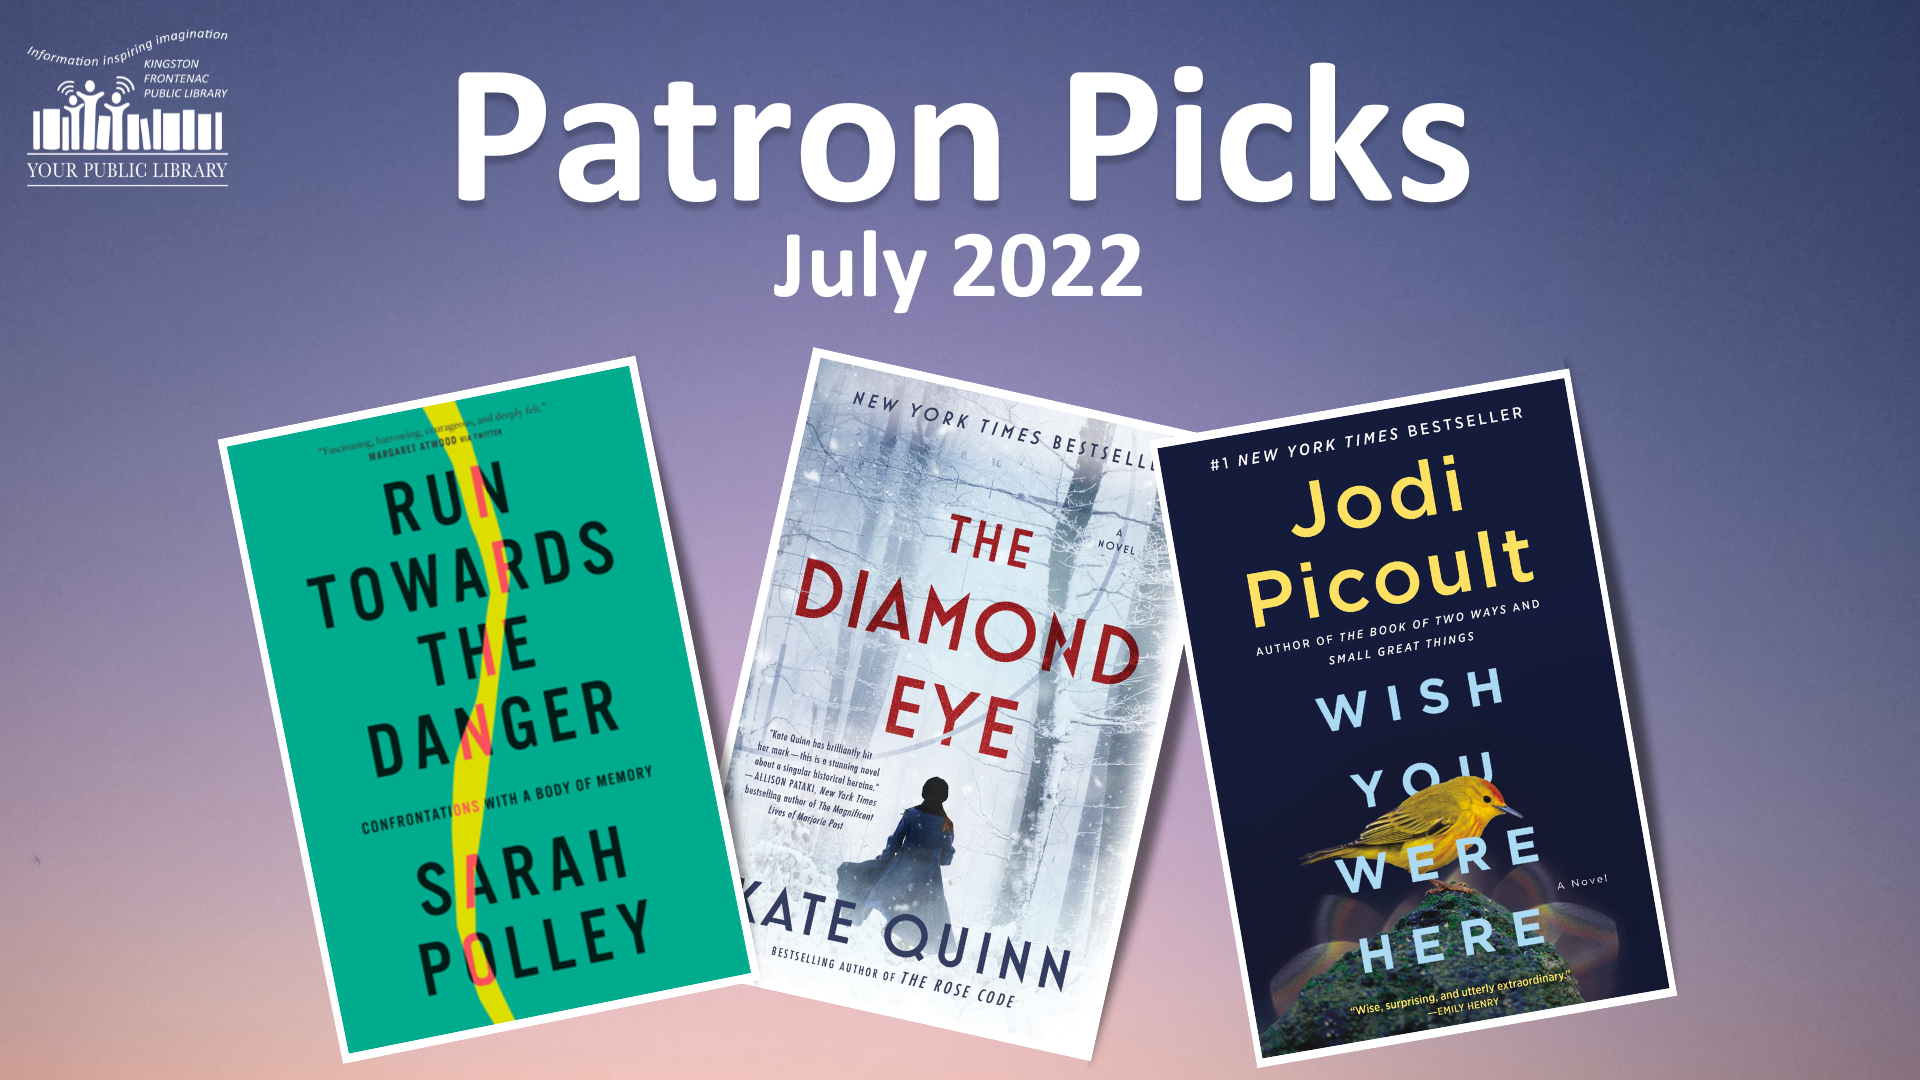 Patron Picks - July 2022 on a blue and pink gradient background. Book covers for Run Towards the Danger, Diamond Eye and Wish You Were Here.